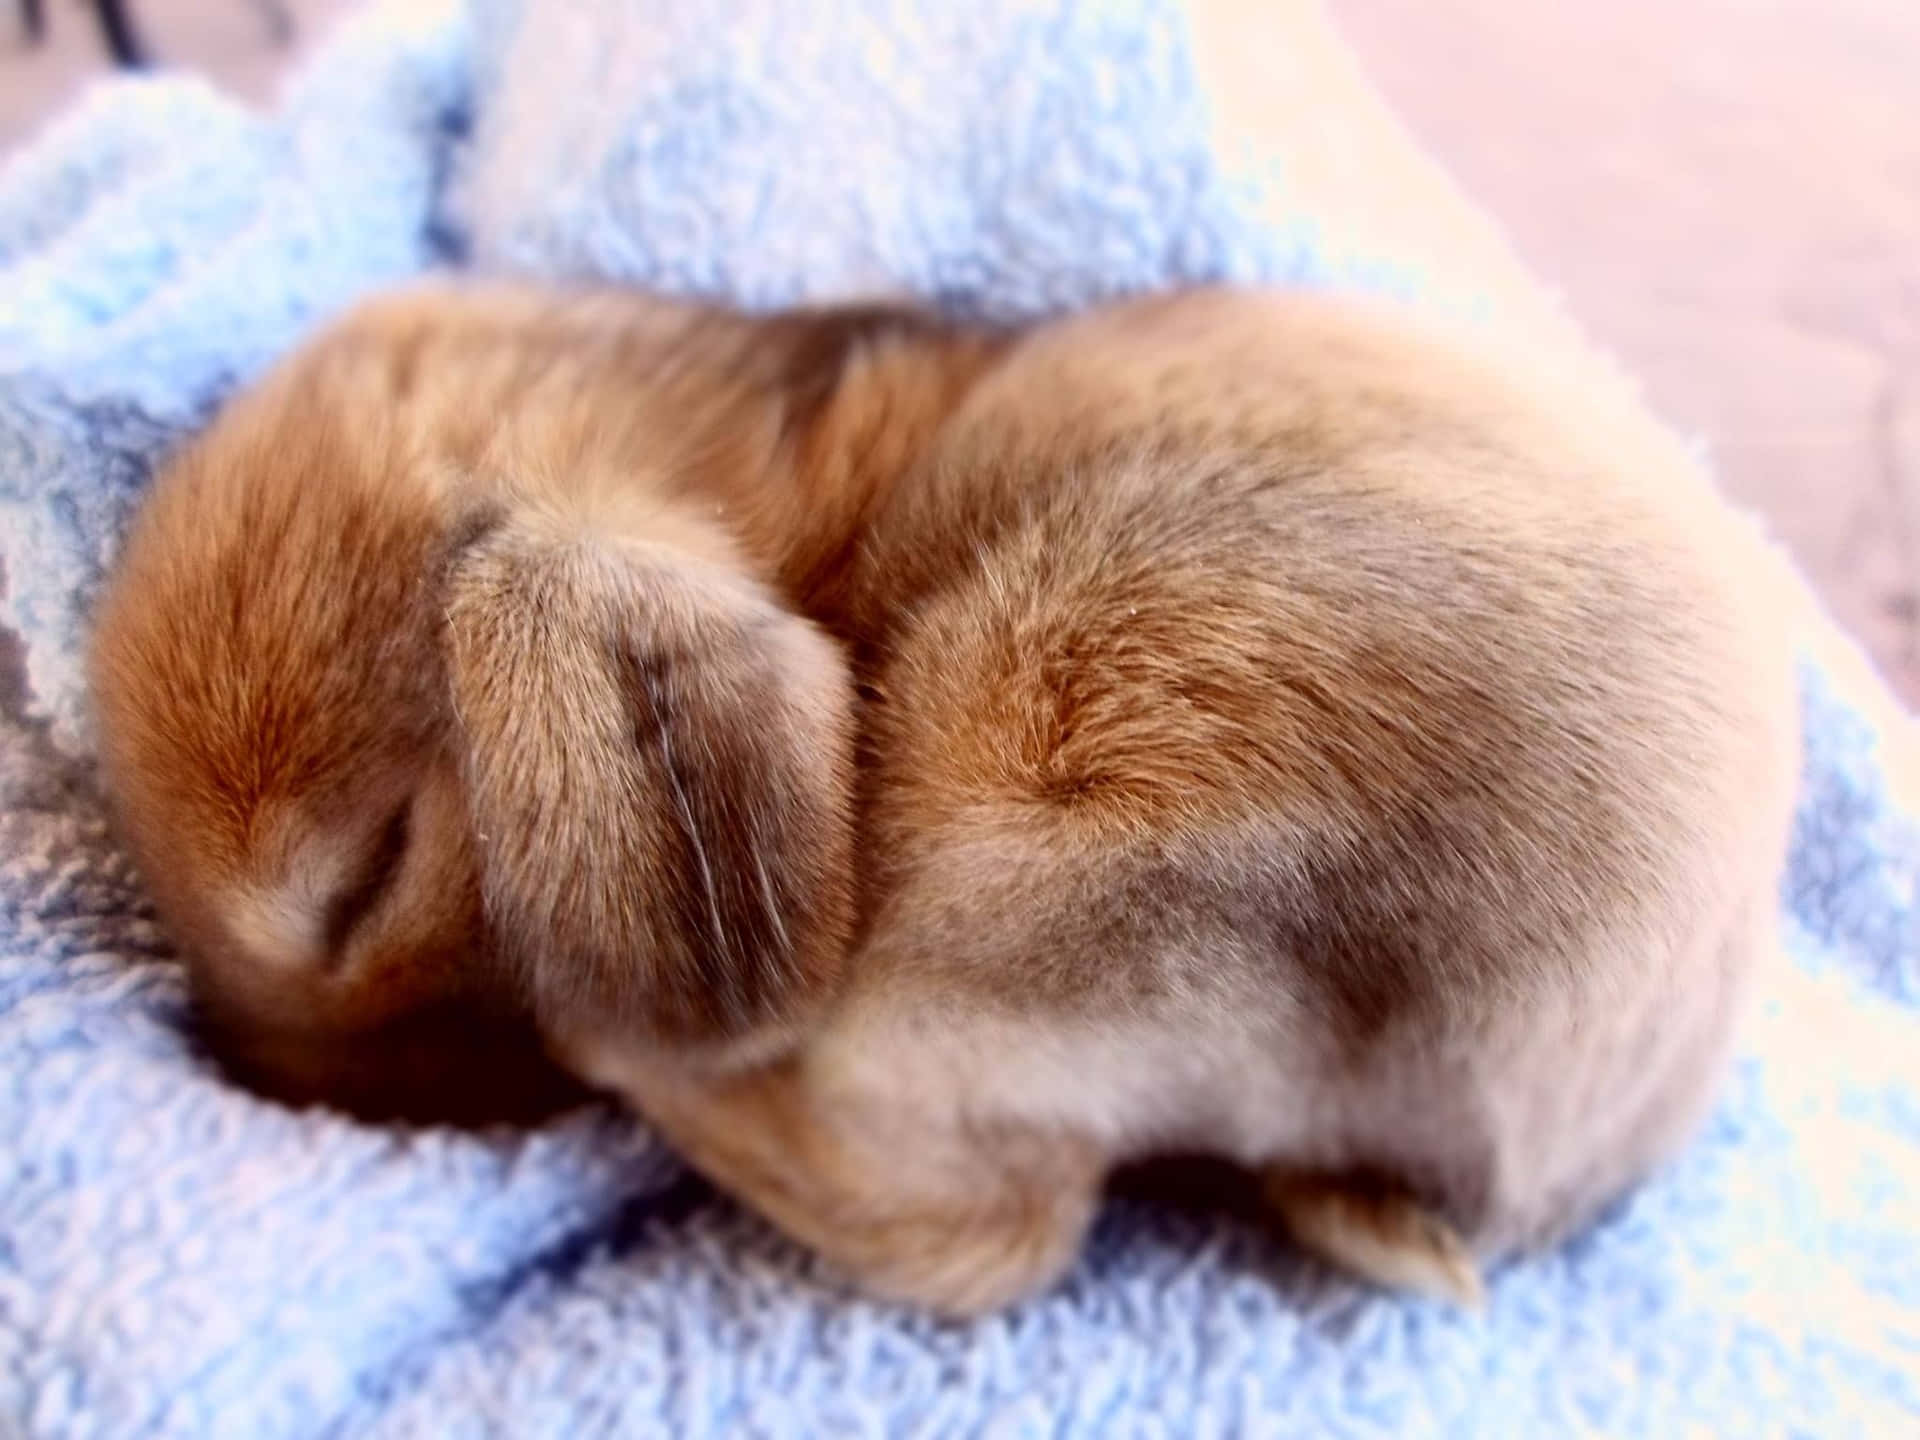 Sleeping Cute Bunny Picture